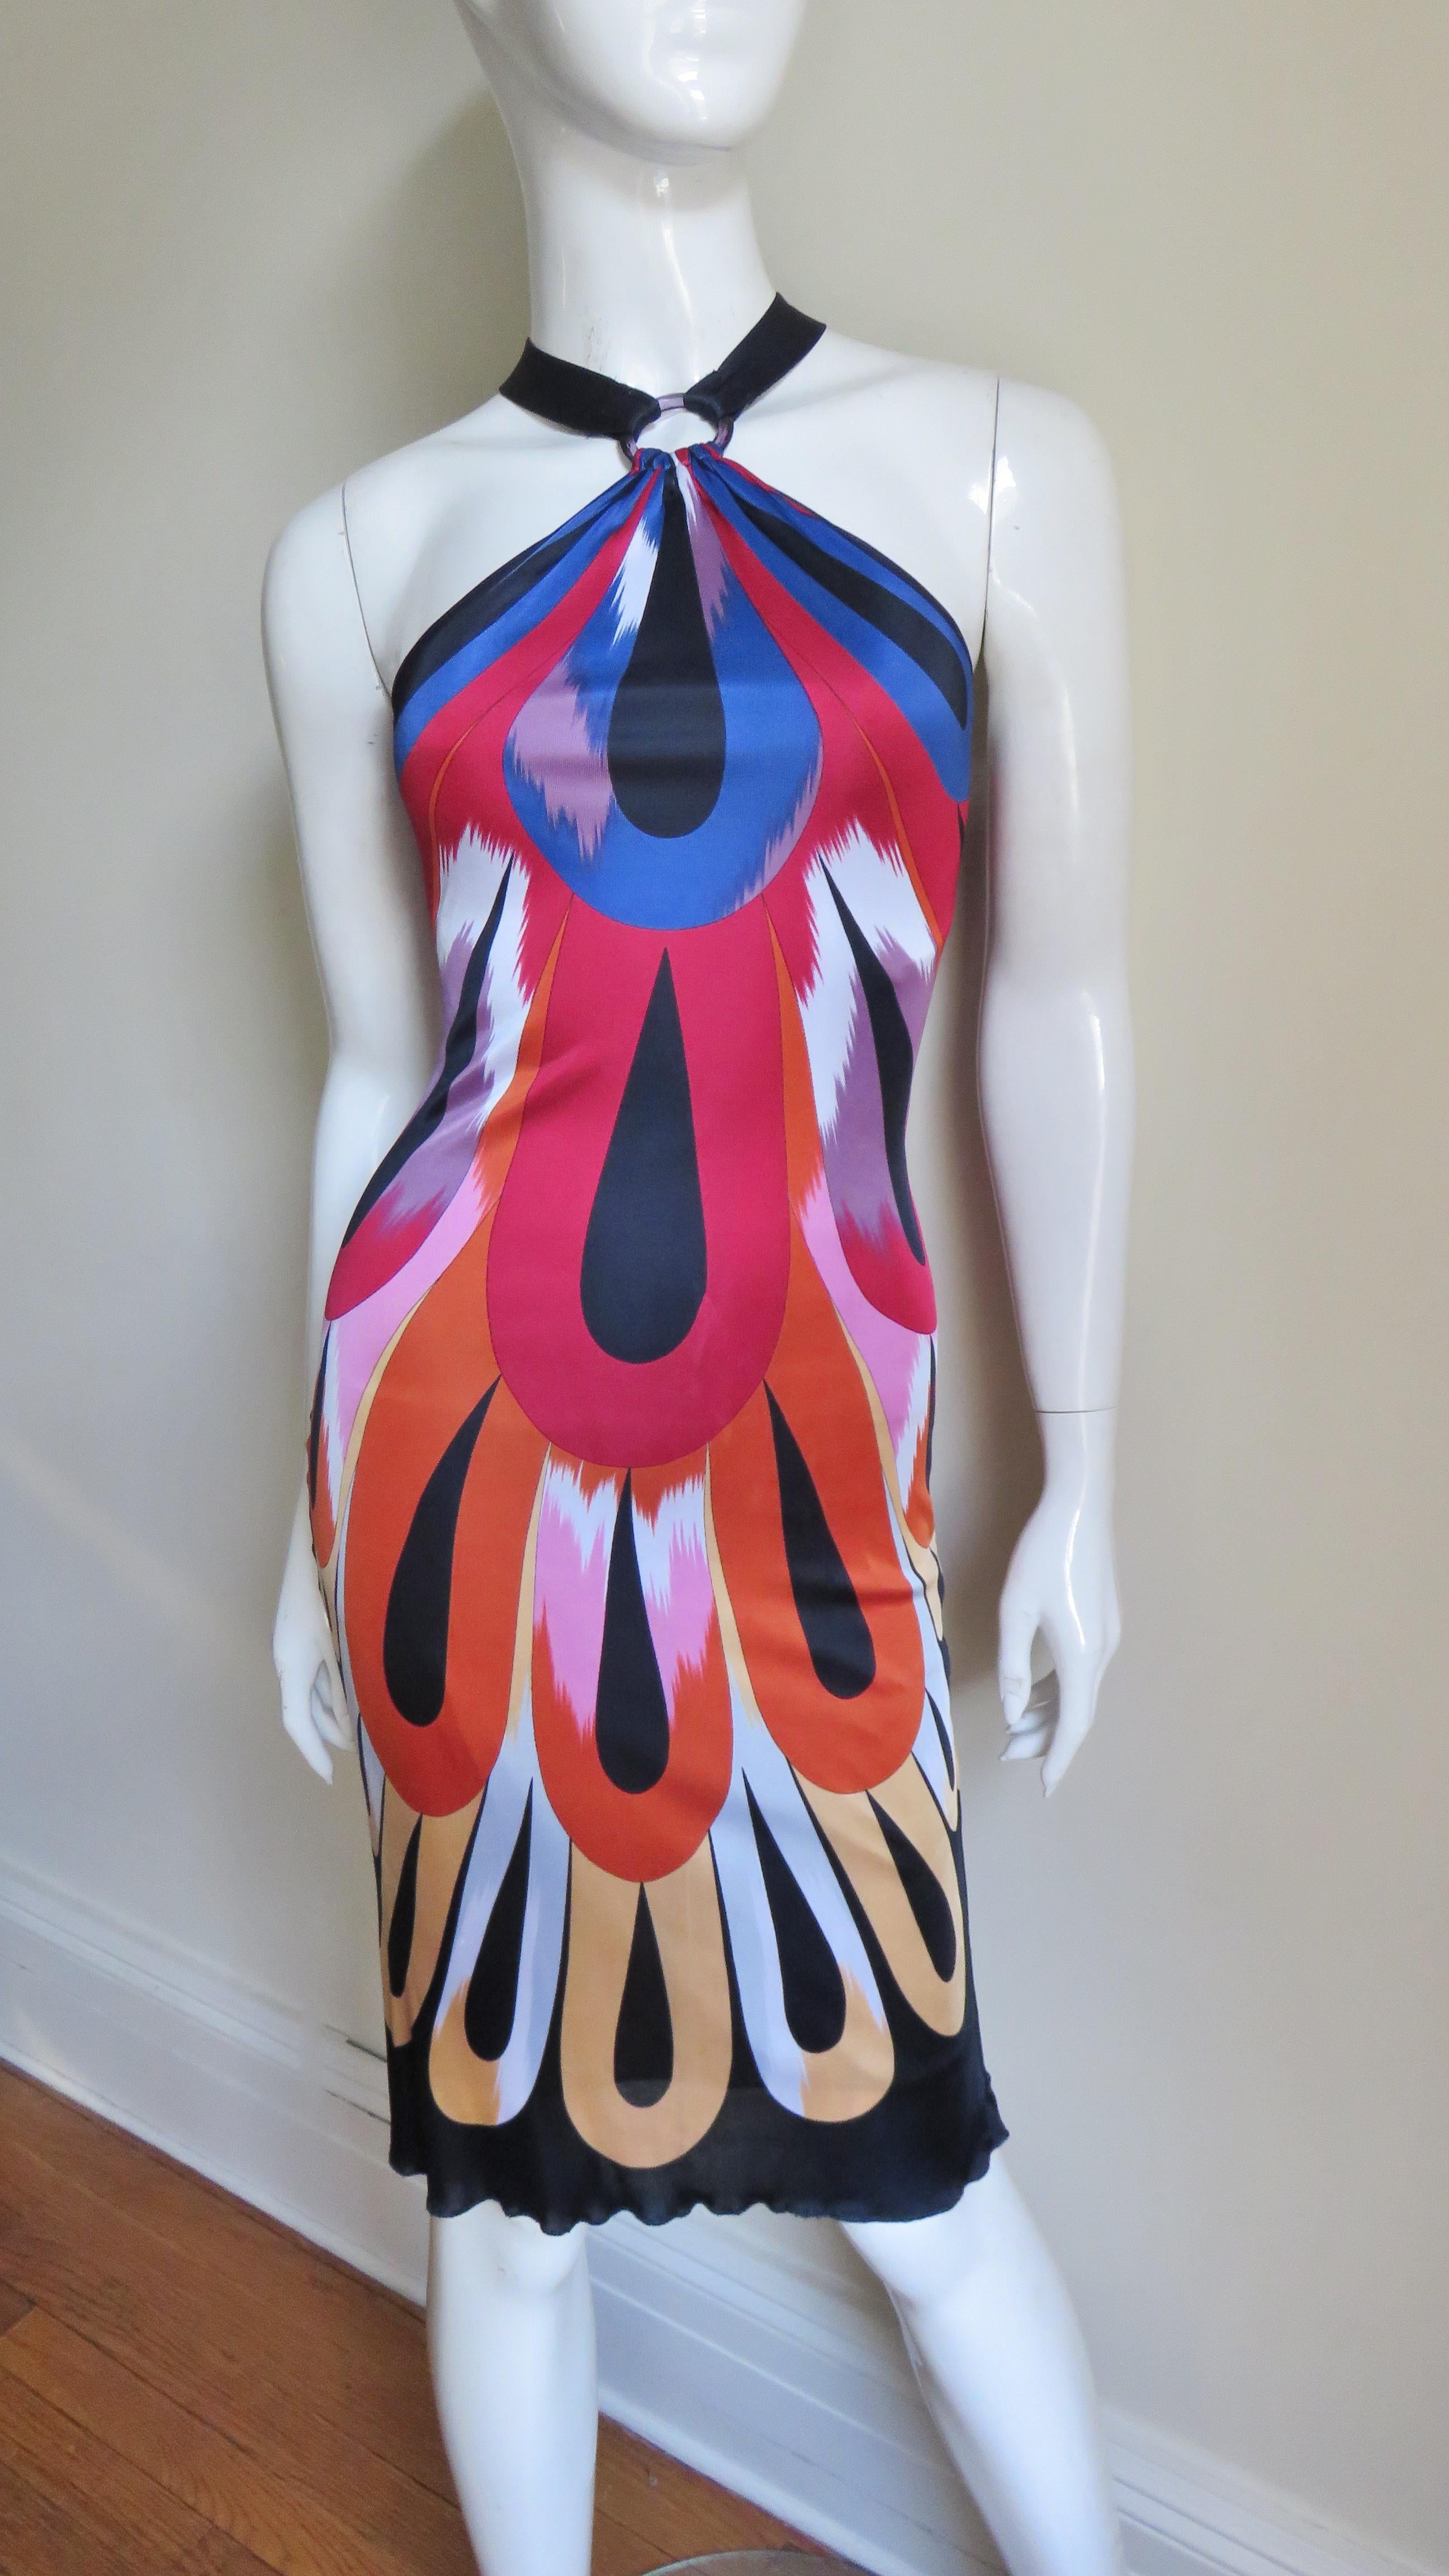 A fabulous colorful silk knit halter dress from Missoni. The pattern is abstract in red, orange, blue, yellow, white, lavender and black. The dress slips on over the head with 2 black straps which snap closed at the back of the neck around a clear